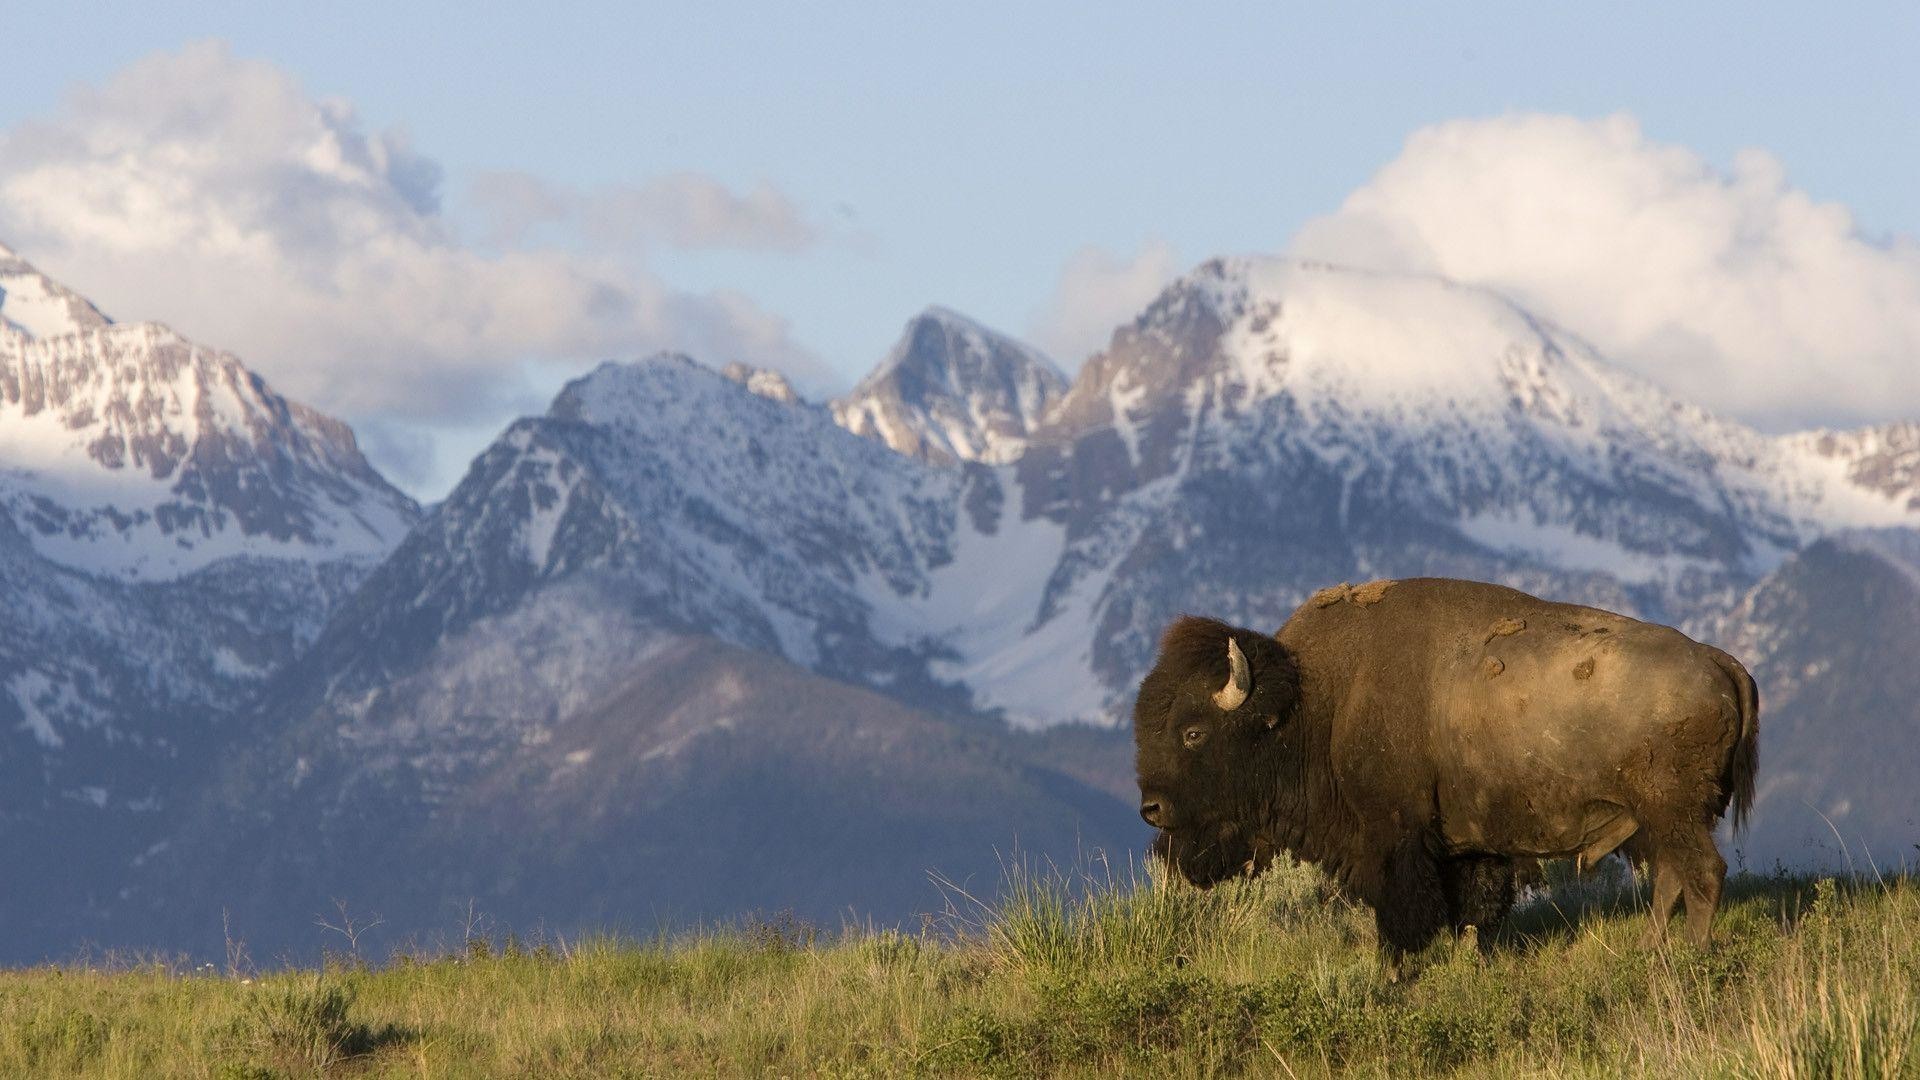 1920x1080 American Bison Wallpaper | Pictures of Bison | Cool Wallpapers